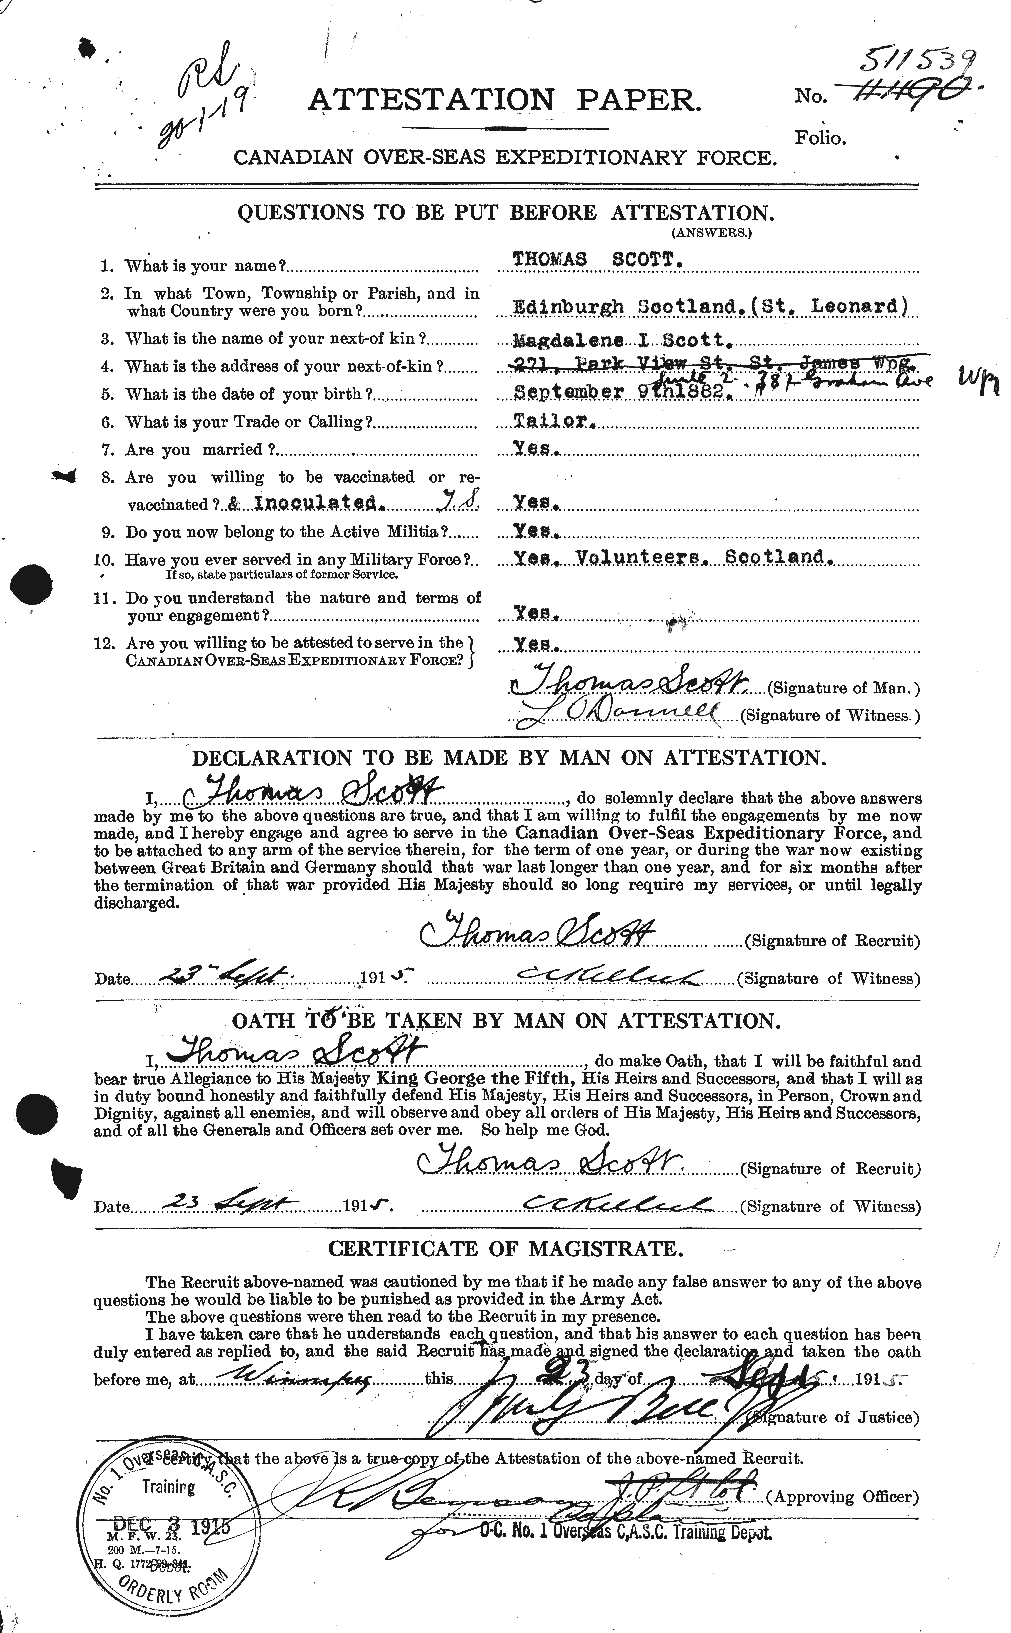 Personnel Records of the First World War - CEF 088535a